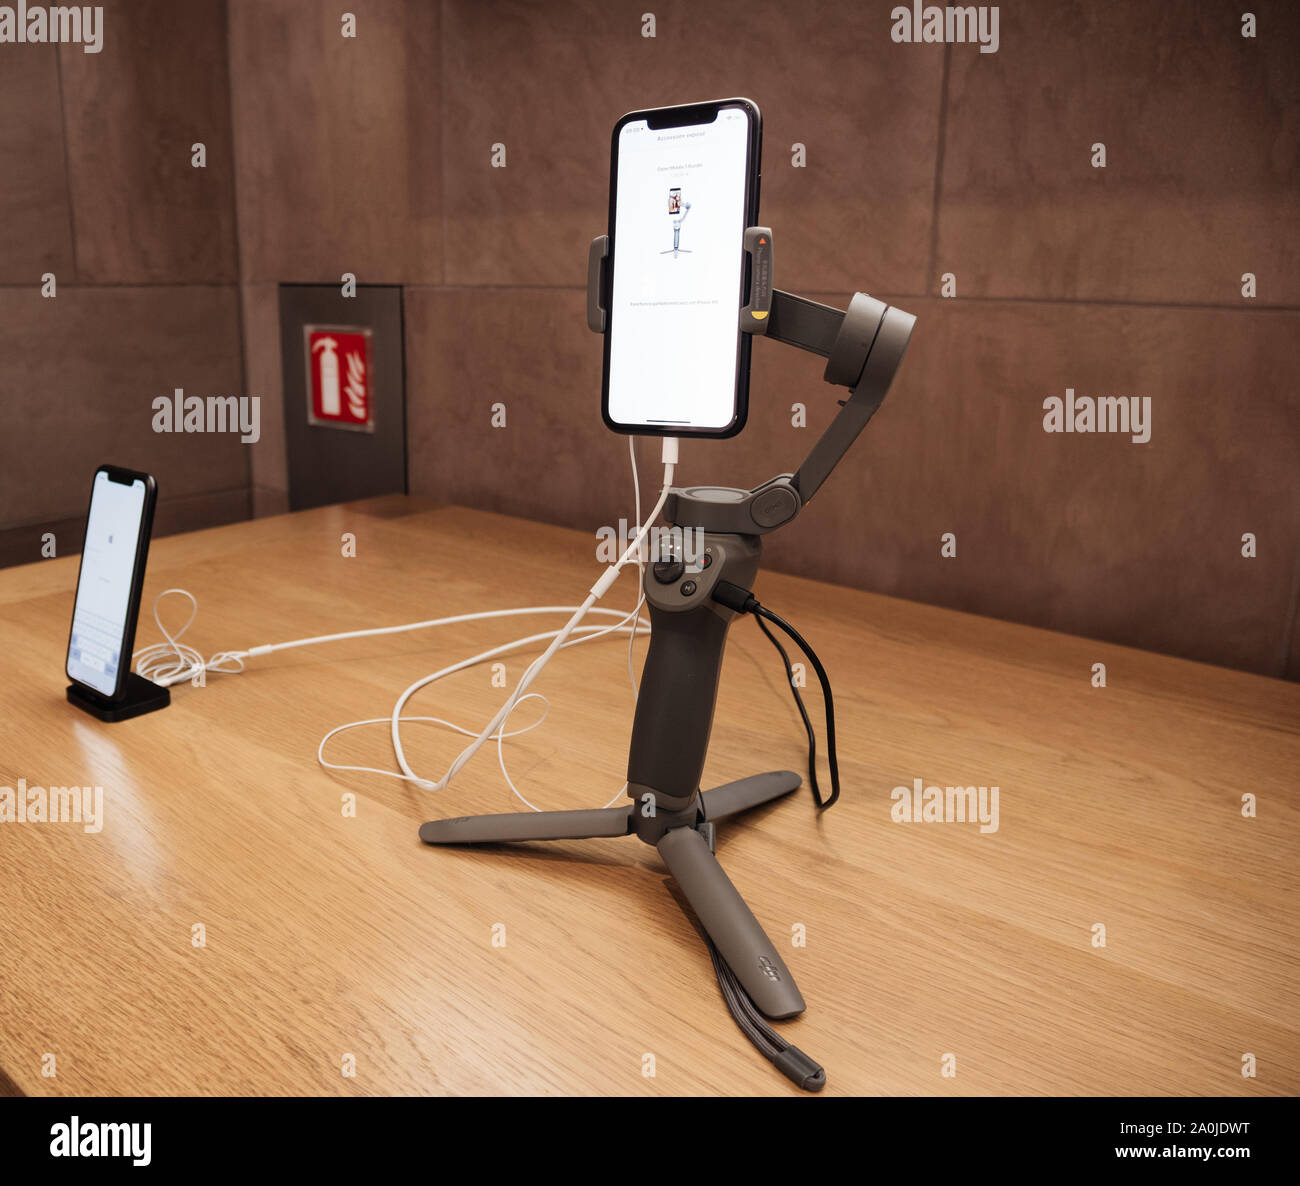 Paris, France - Sep 20, 2019: New DJI Osmo 3 gimbal with the new iPhone 11,  11 Pro and Pro Max are displayed in Apple Store Stock Photo - Alamy